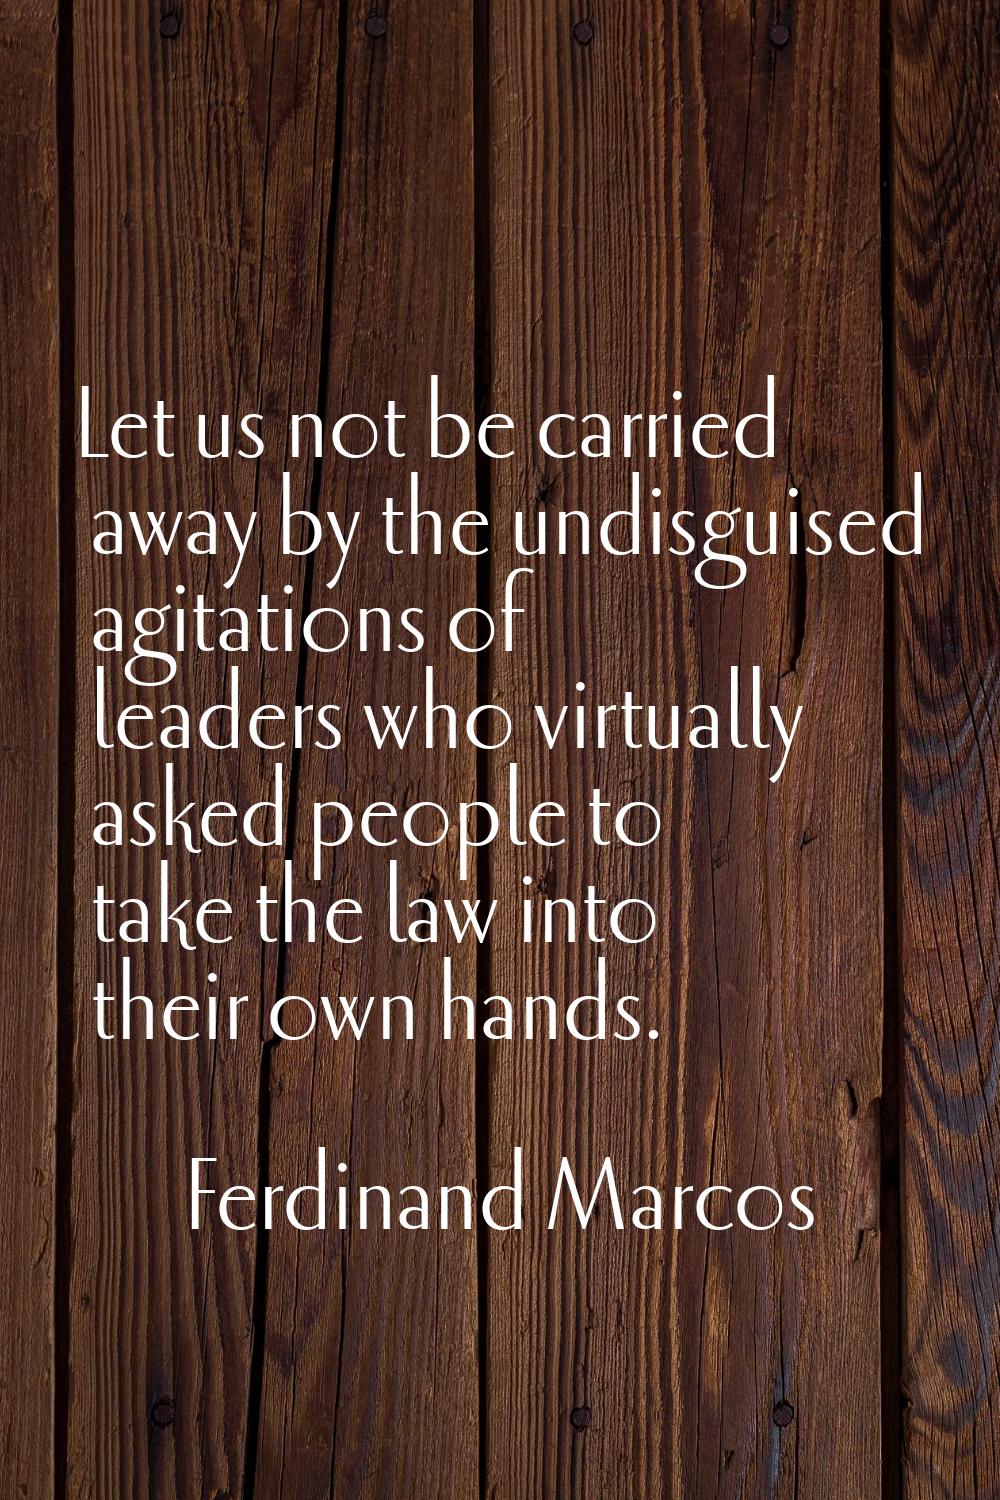 Let us not be carried away by the undisguised agitations of leaders who virtually asked people to t